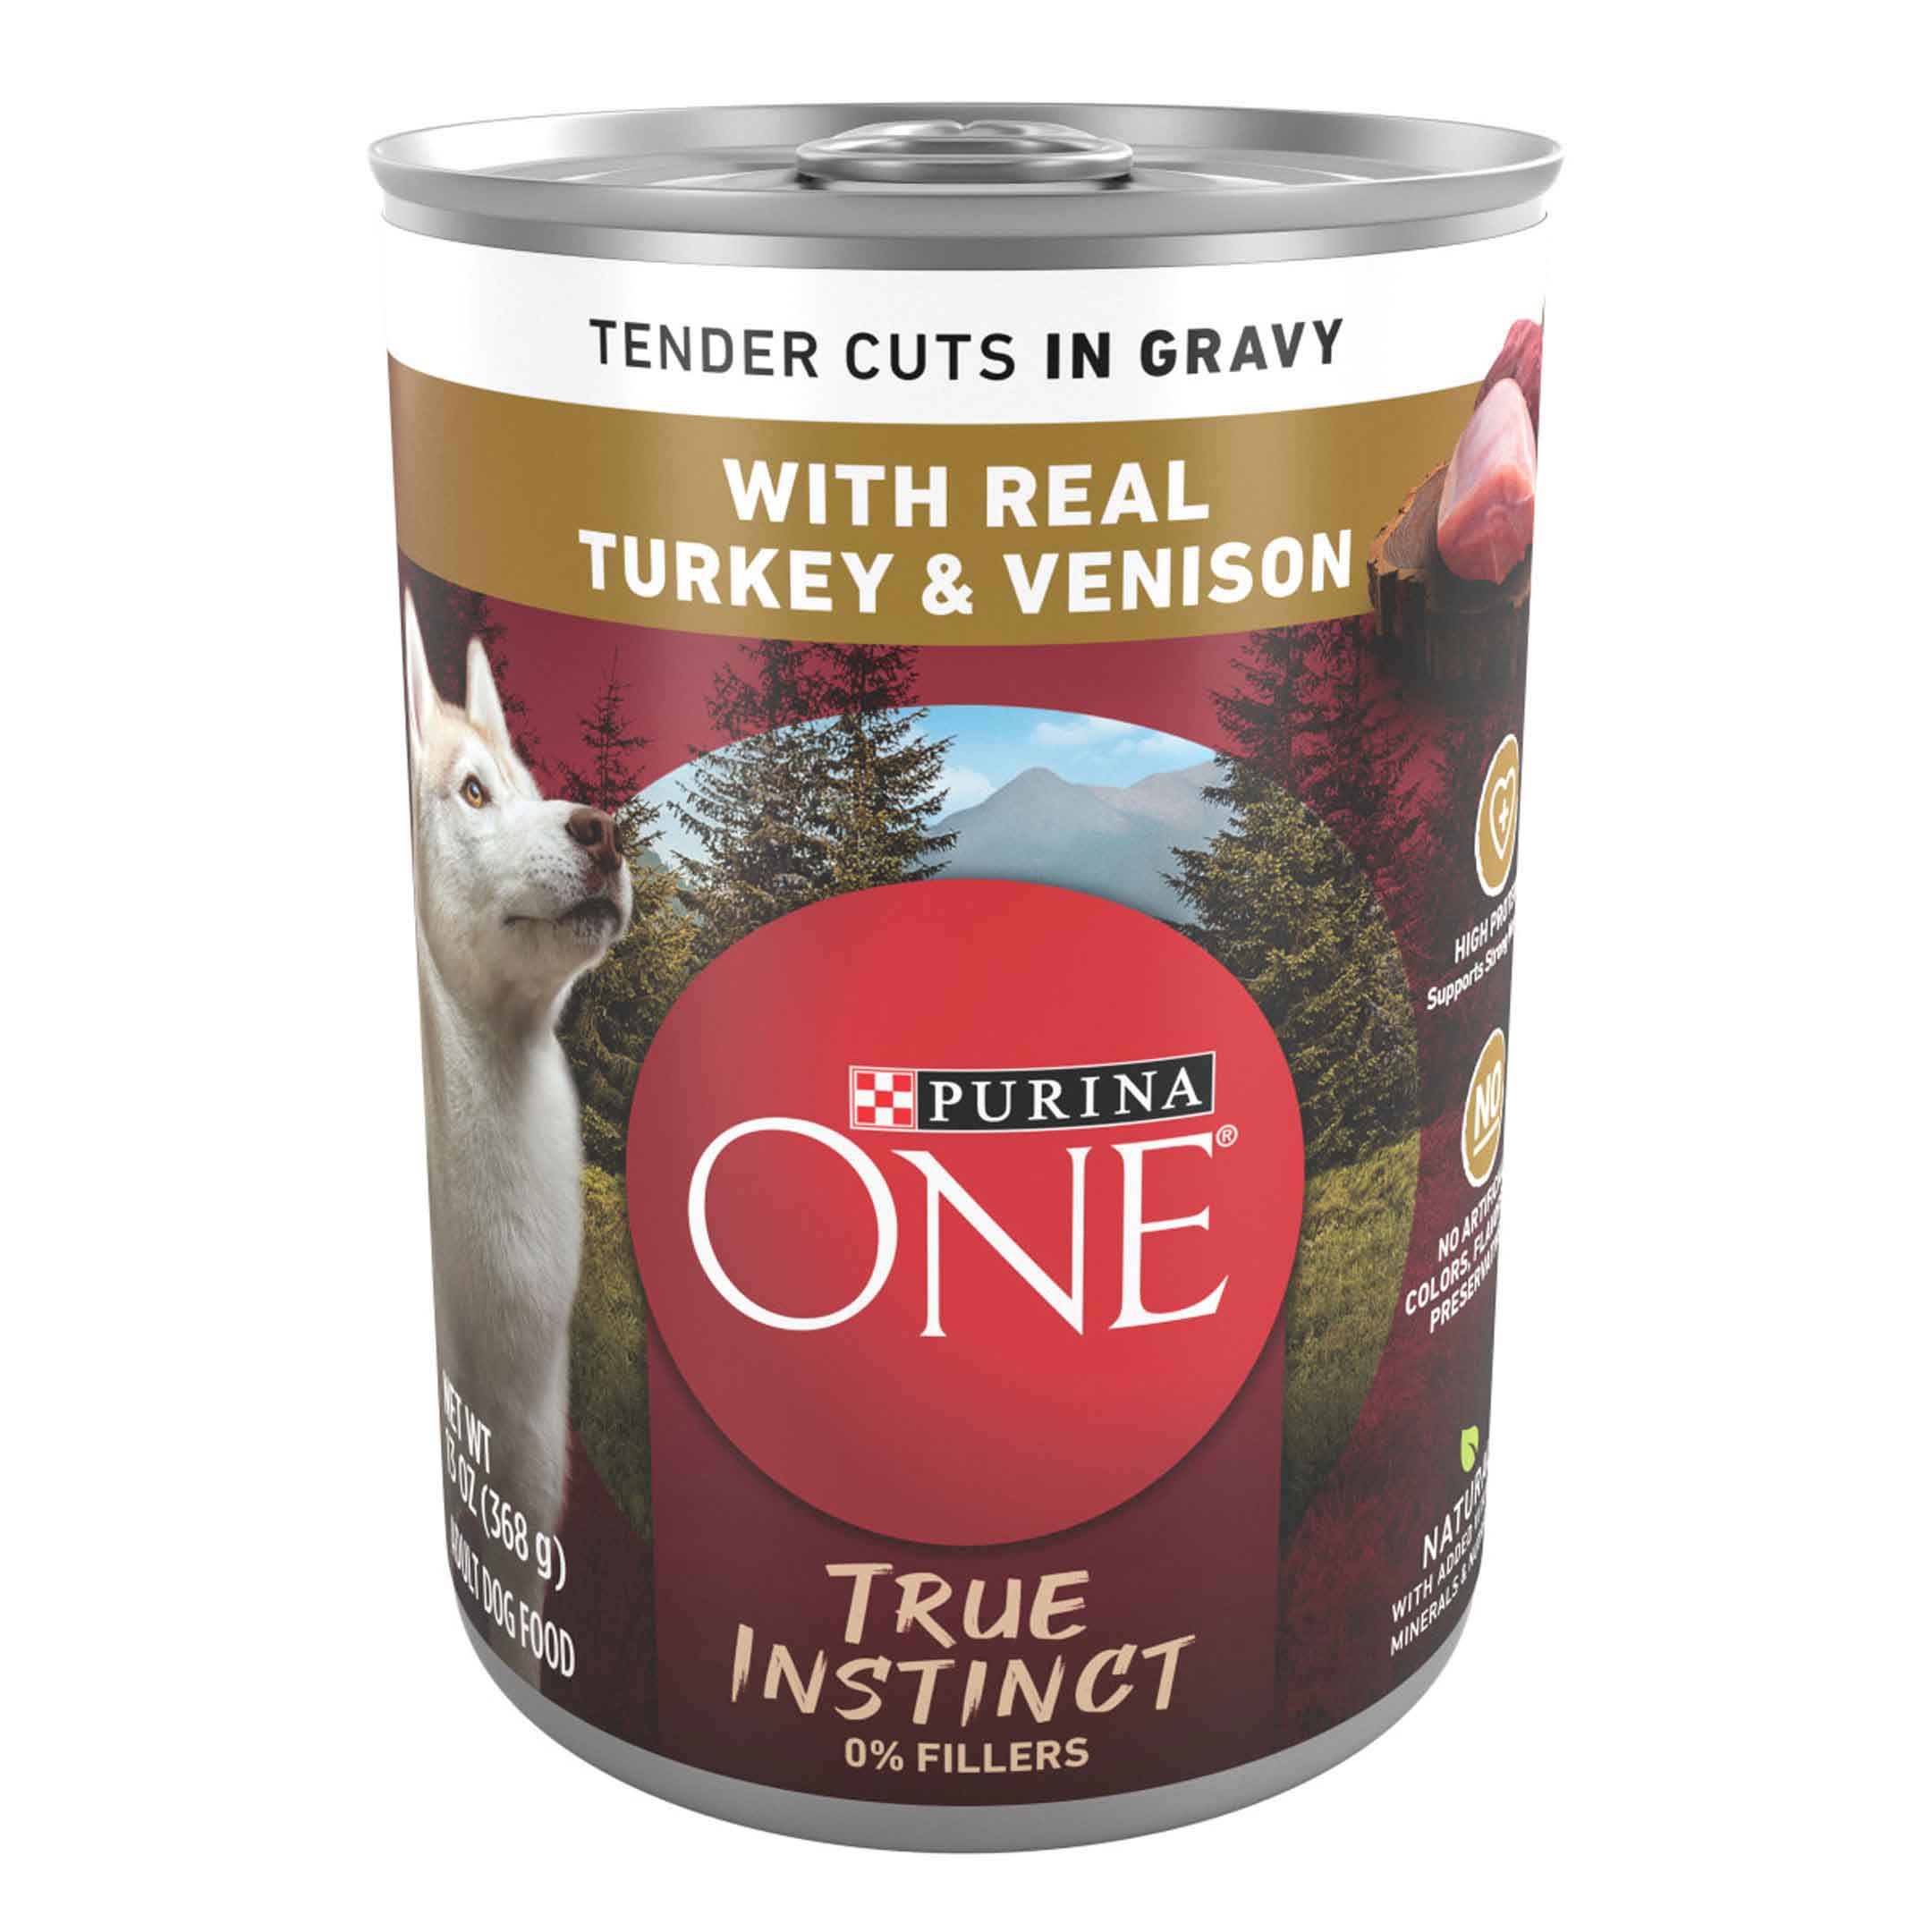 Purina ONE Natural, High Protein Gravy Wet Dog Food, SmartBlend True Instinct Real Turkey & Venison - 13 Ounce Can